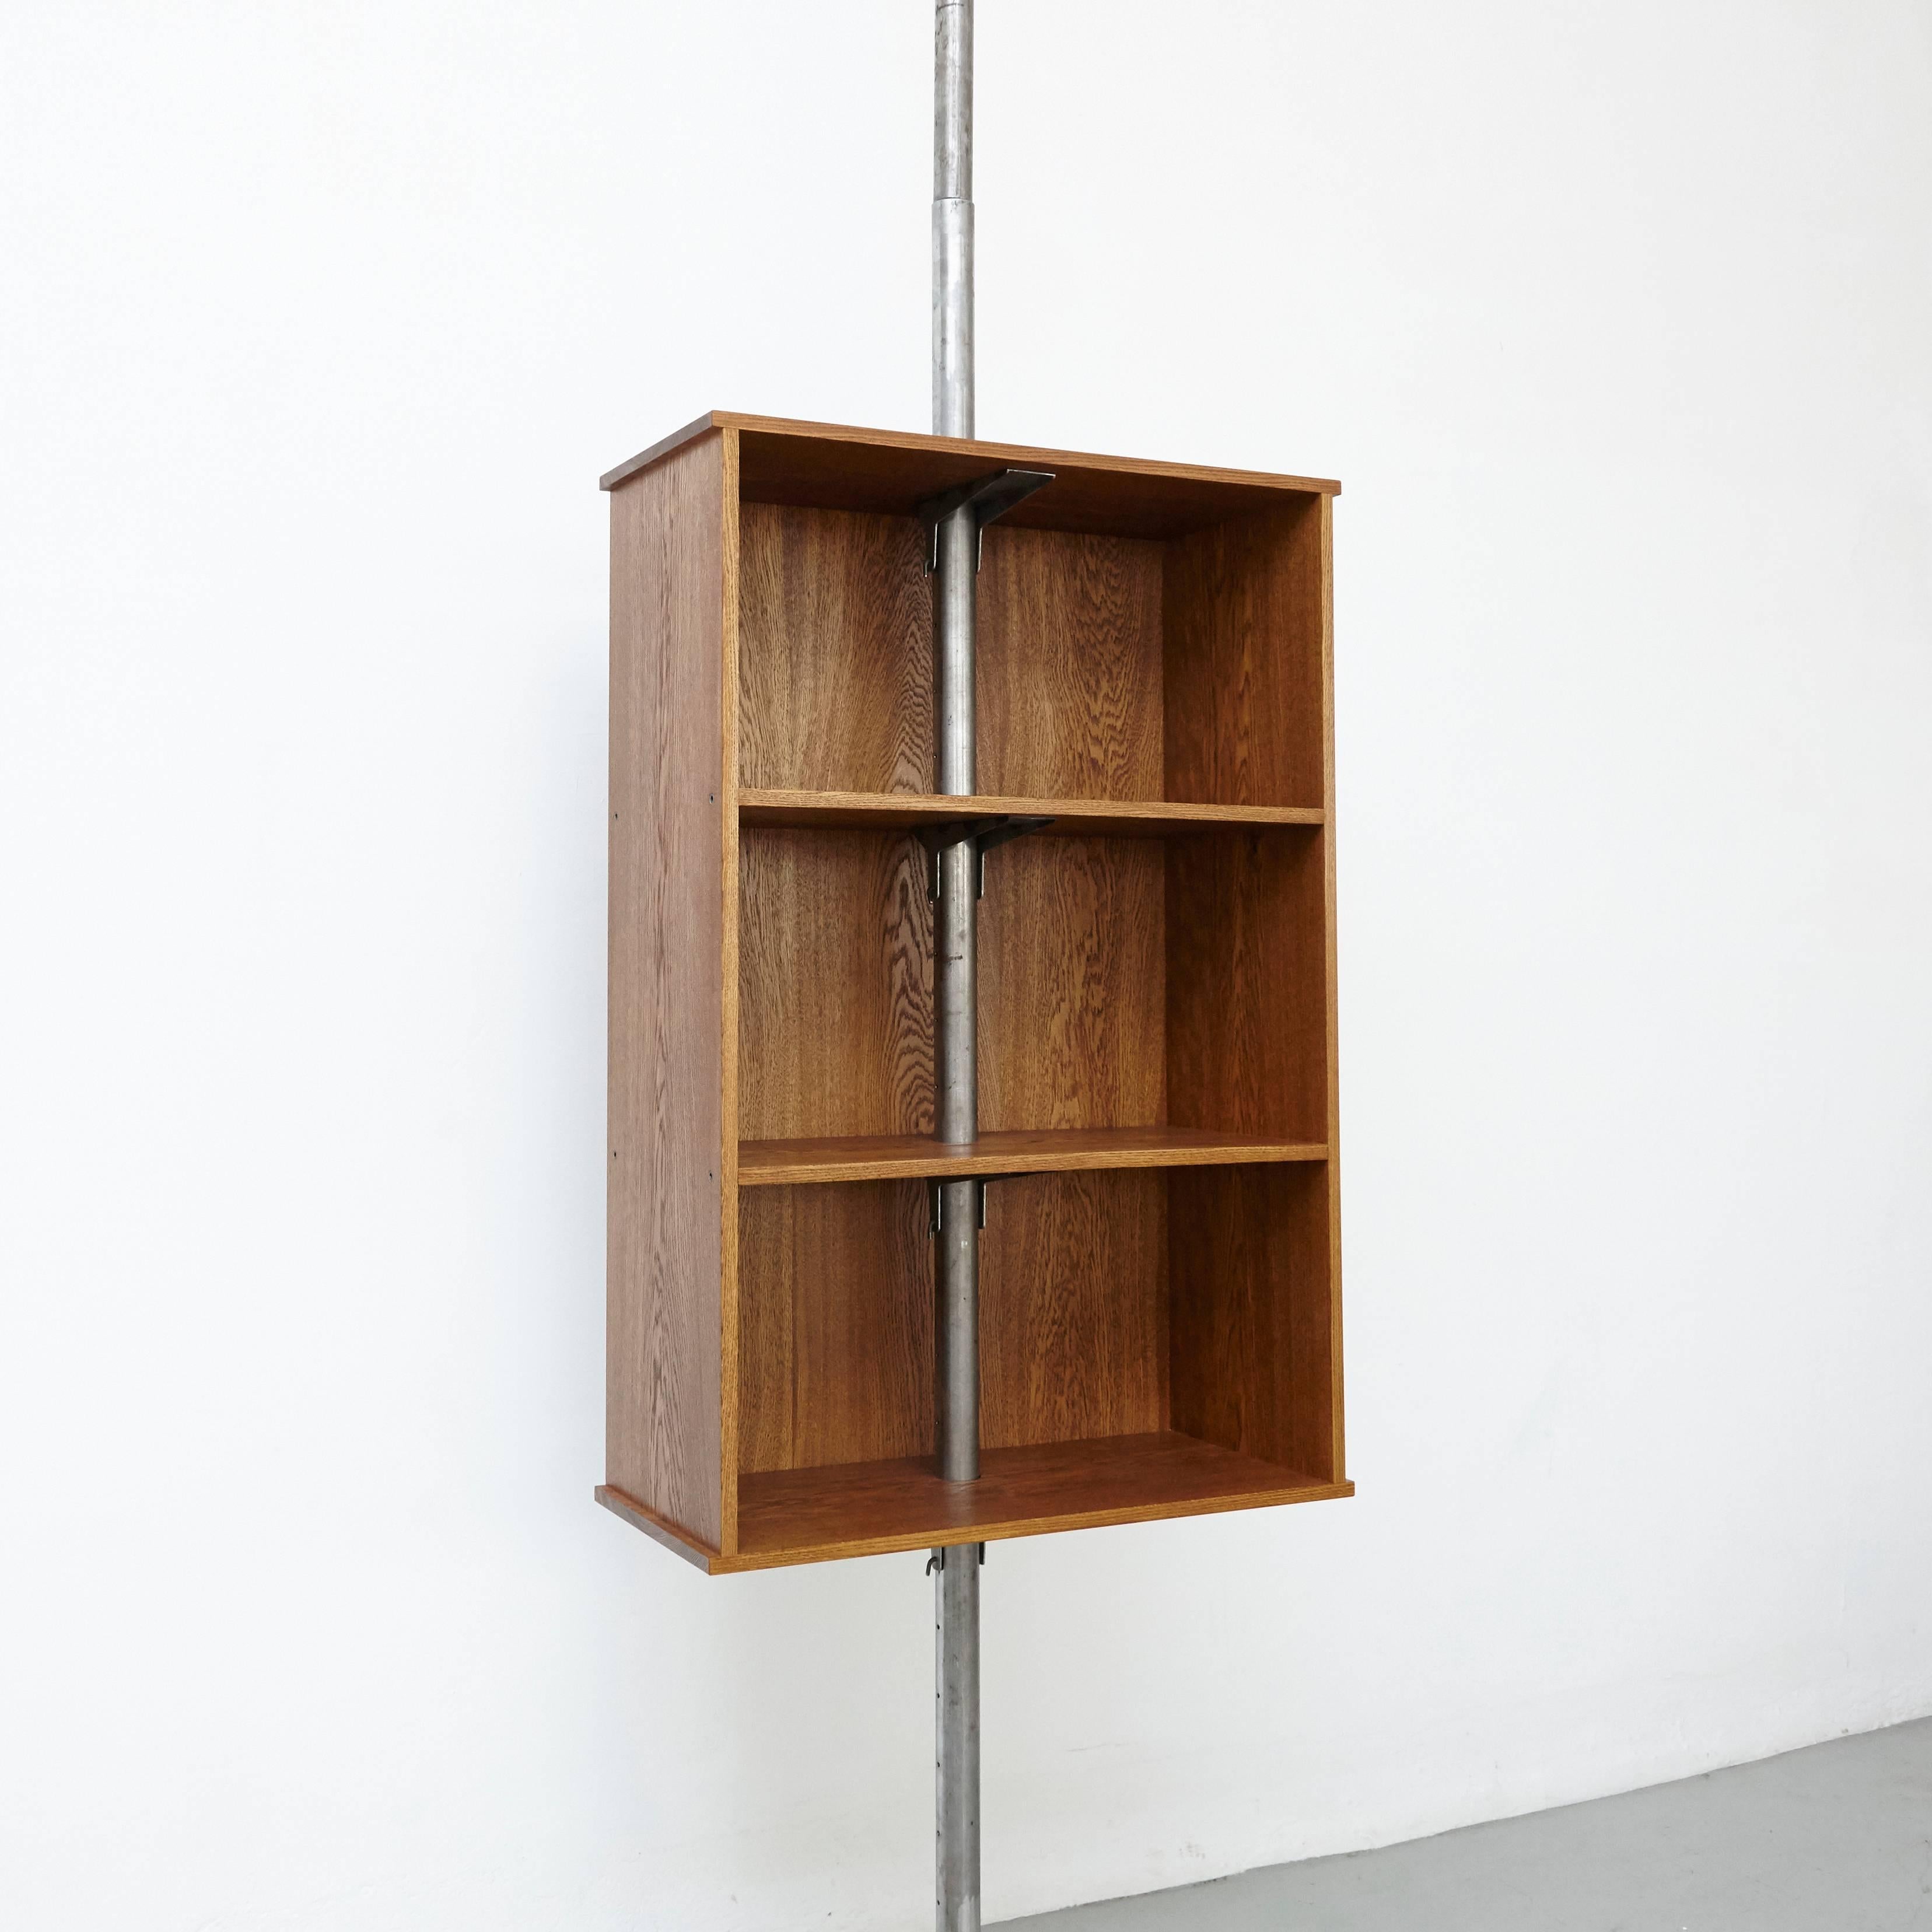 Bibliotheque designed by DADA est. manufactured in Barcelona, 2017.

Adjustable bibliotheque suspended,

Iron and oak

Measures: 40 x 91 x 420 cm.
 